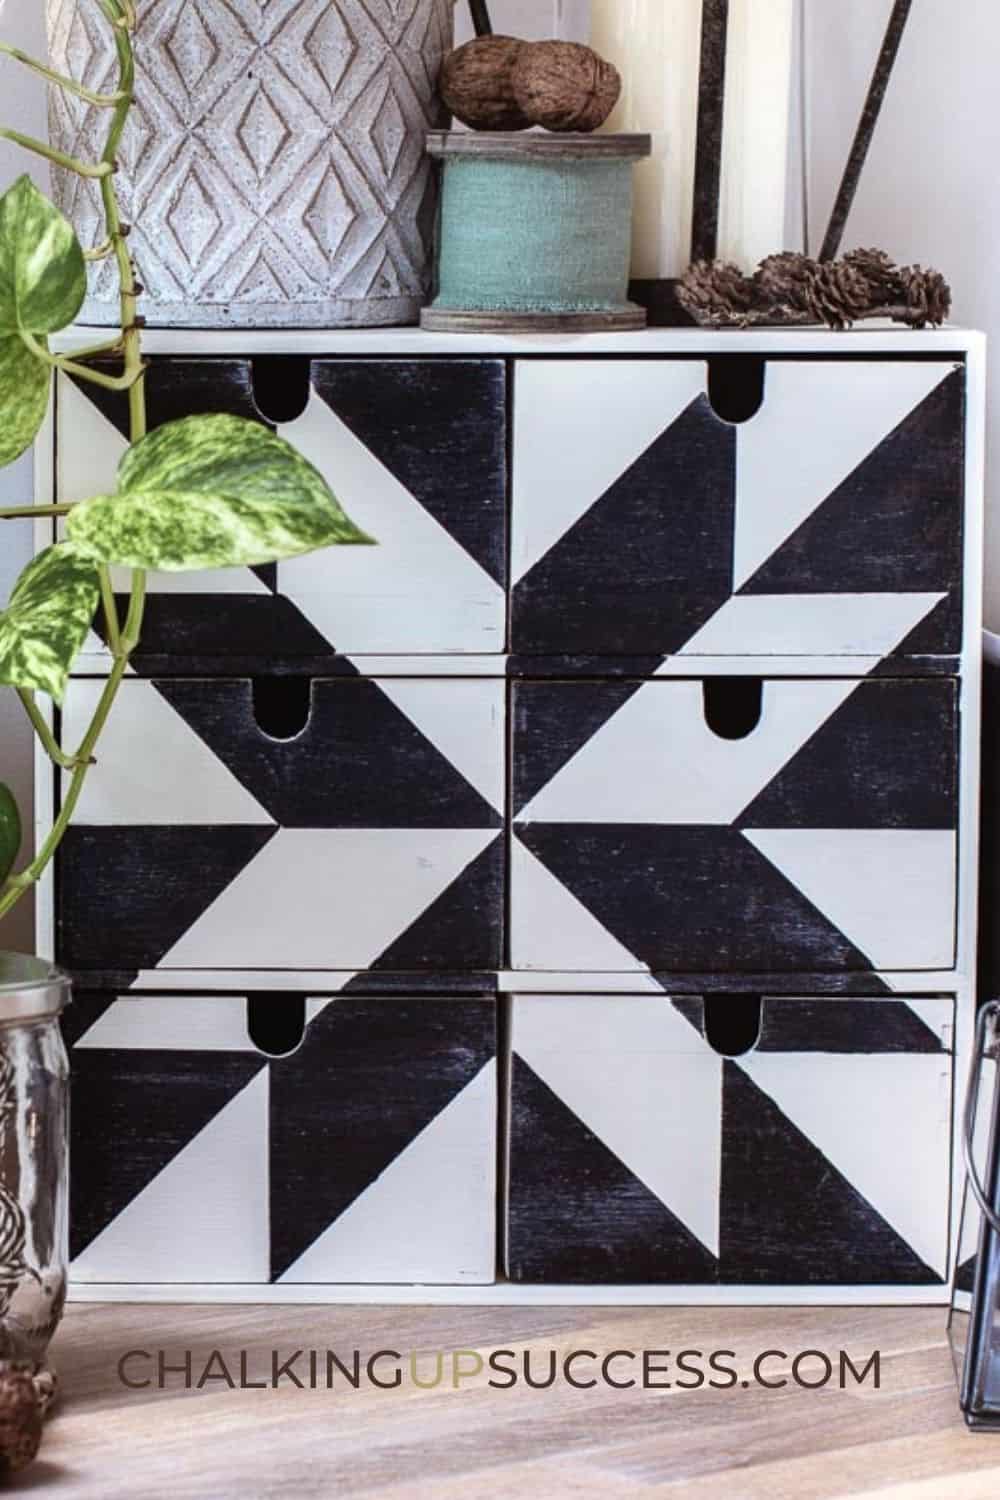 black and white quilt square painted on box shelf